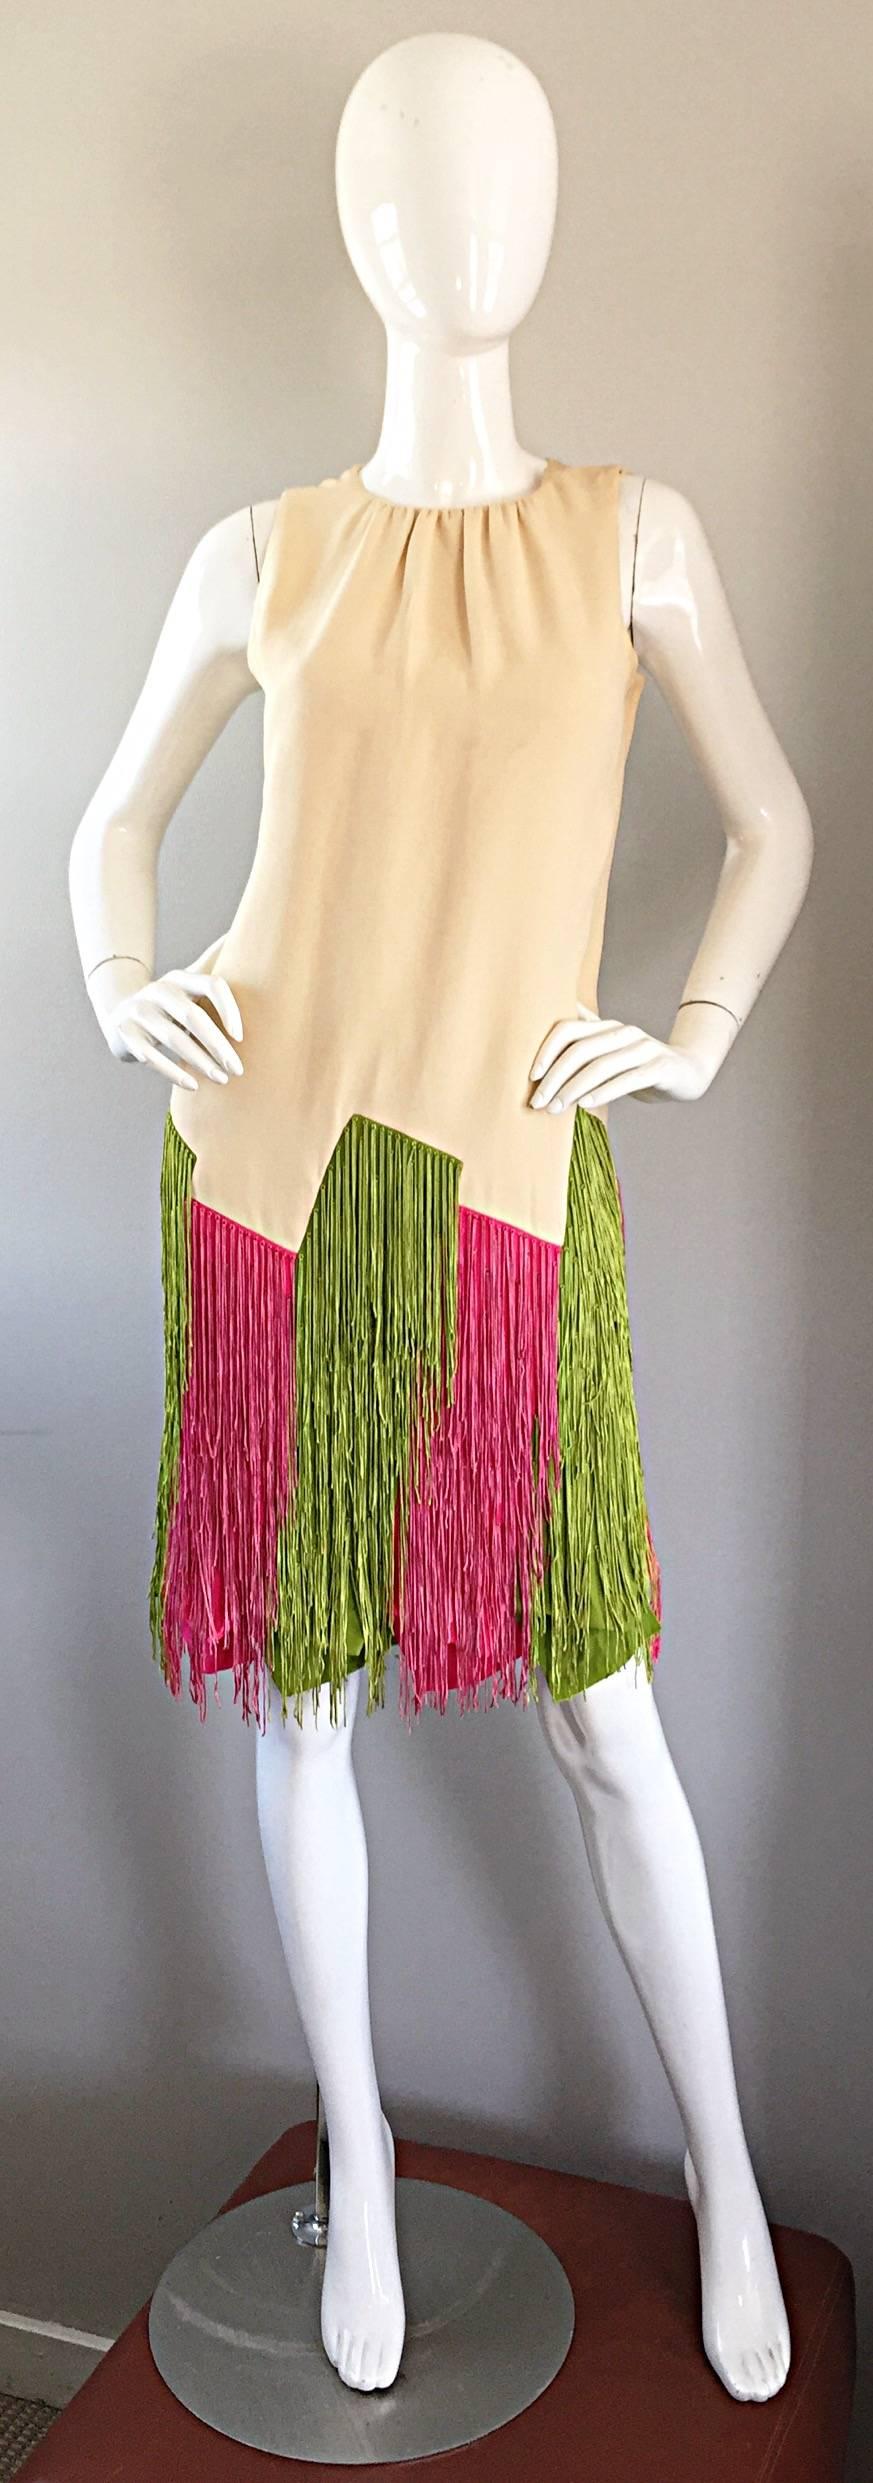 Incredible and rare 60s JEAN LOUIS for I. MAGNIN cream shift dress, with amazing green and pink fringed hem! Couture quality, with incredible attention to detail! Jean Louis was the lead Hollywood costume designer in the 1950s and 1960s, In 1962